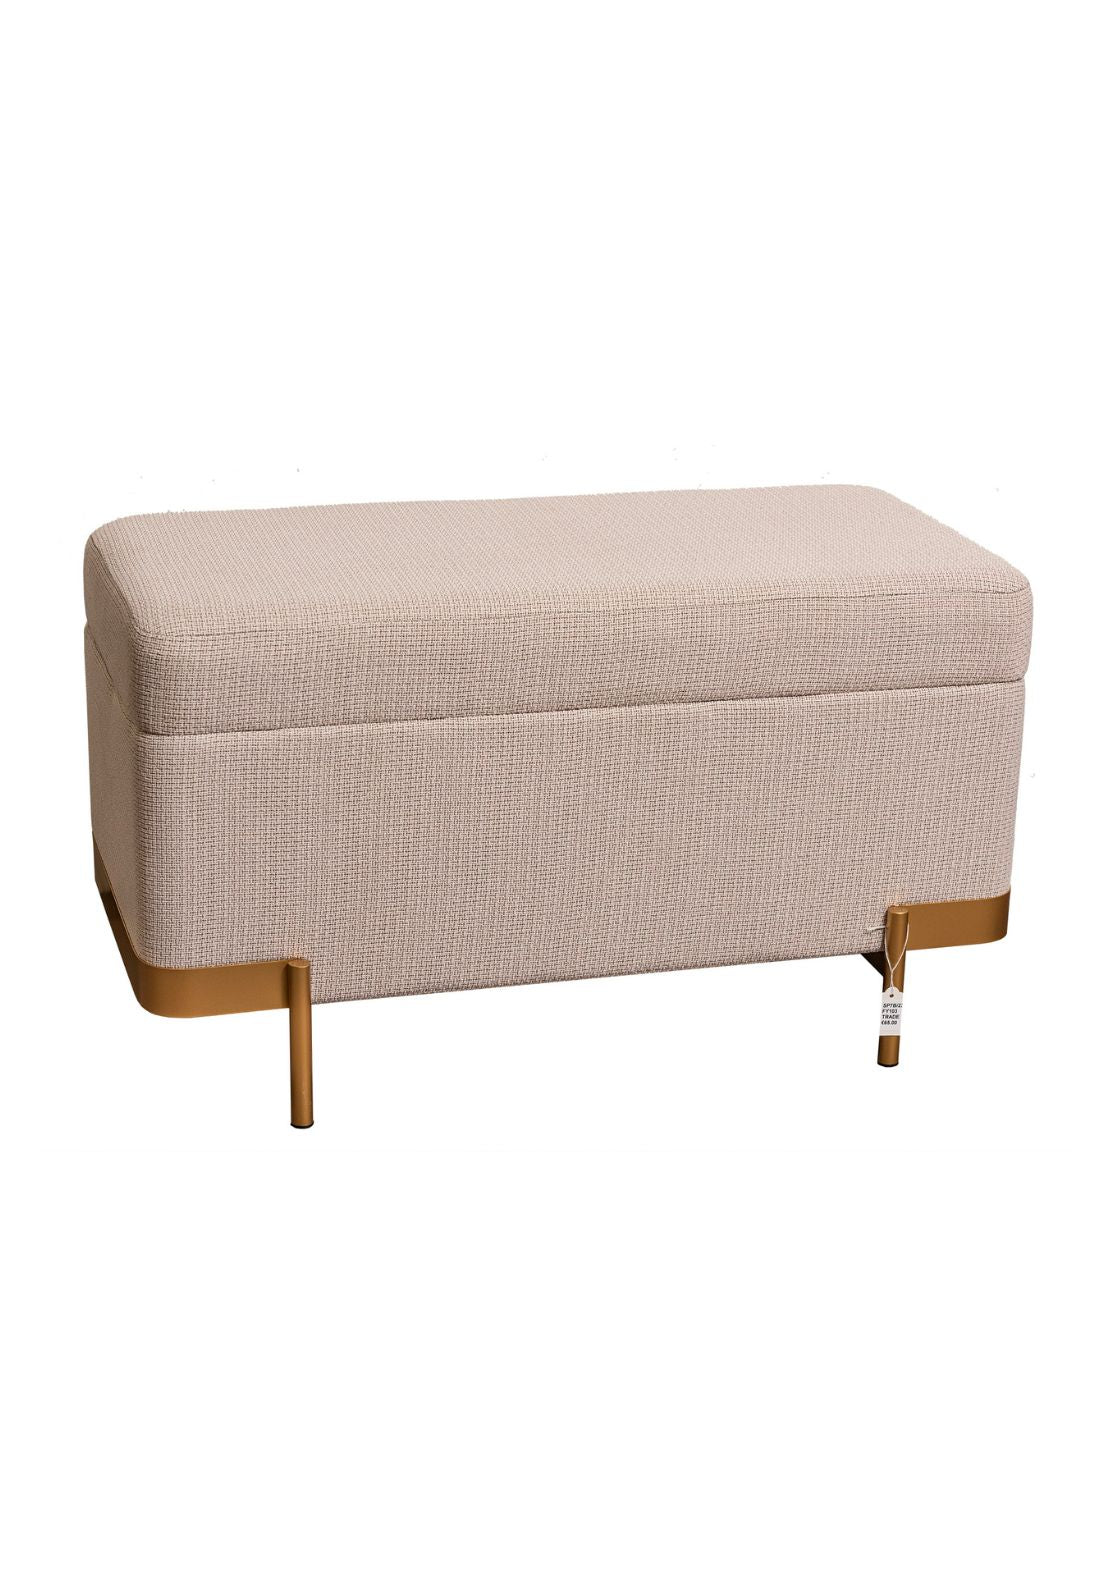 The Grange Collection Luxury Love Seat With Storage 1 Shaws Department Stores